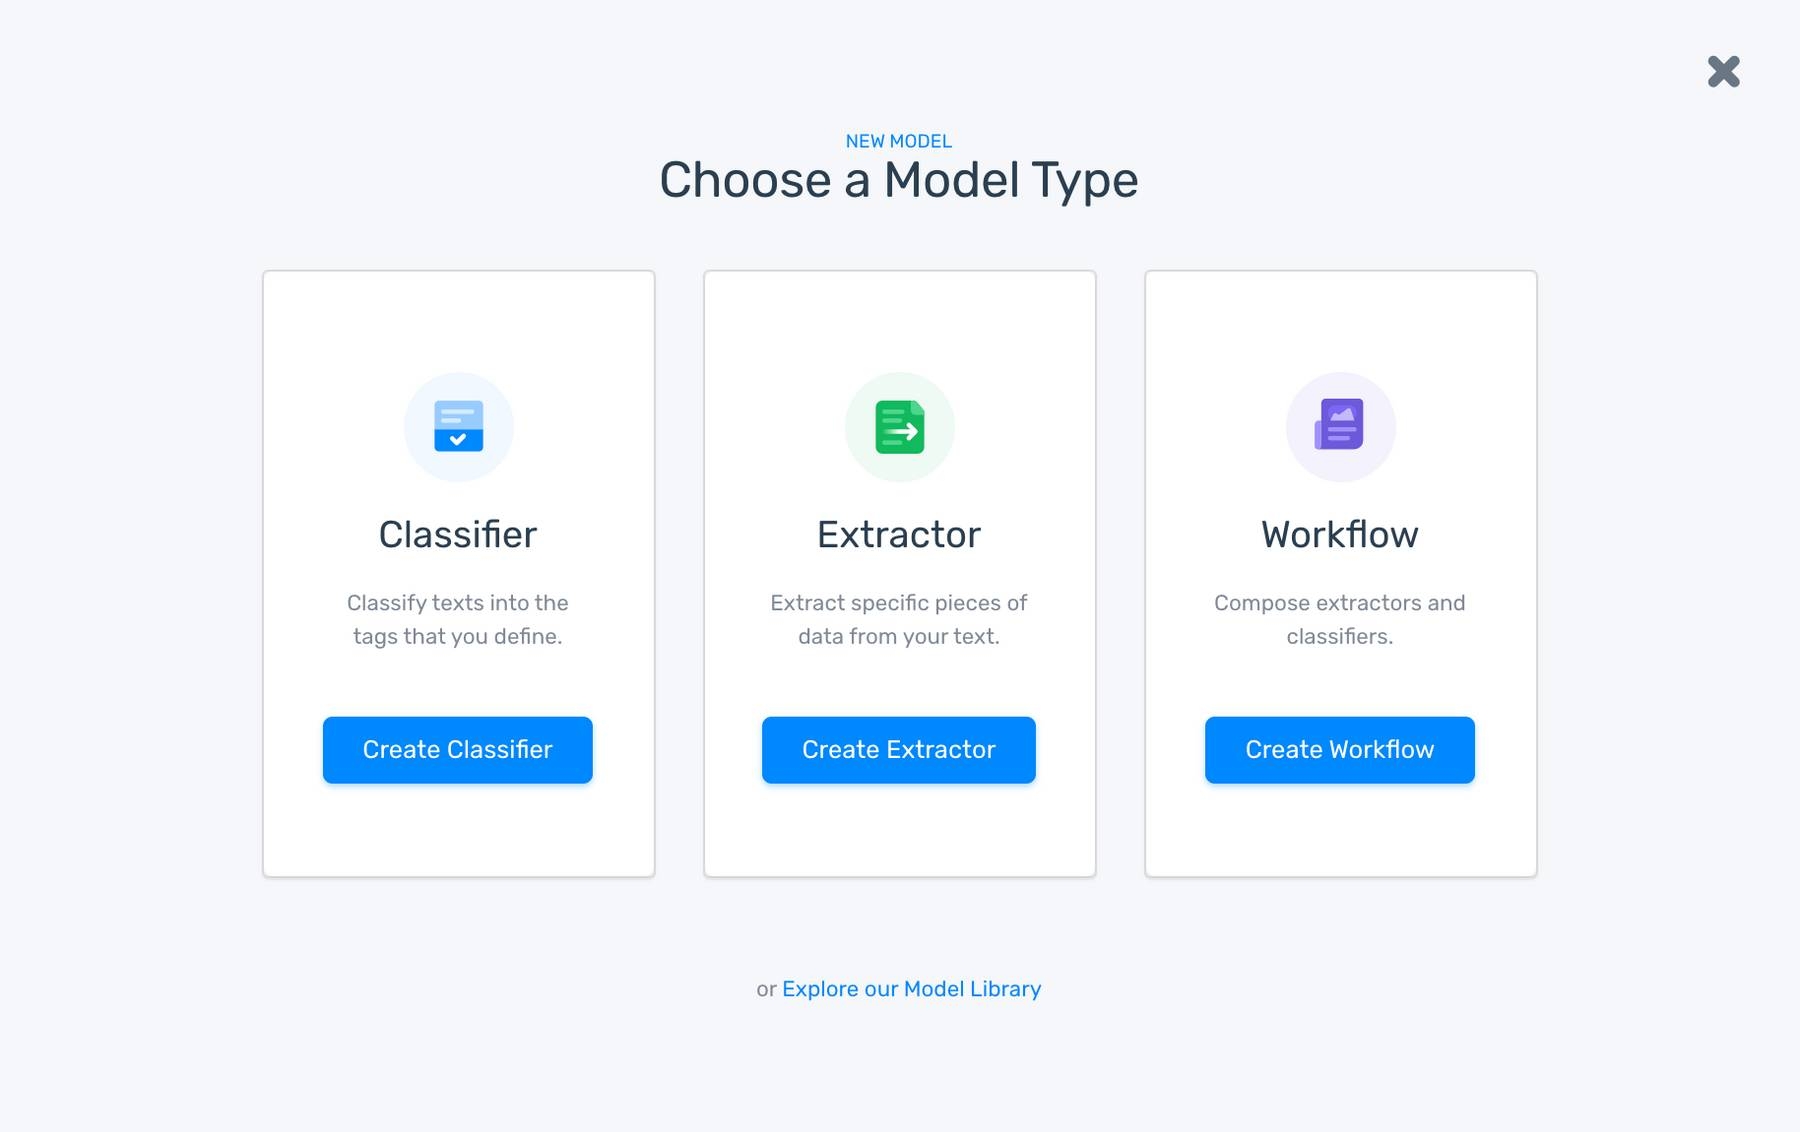 Create a text classifier and choose the model type